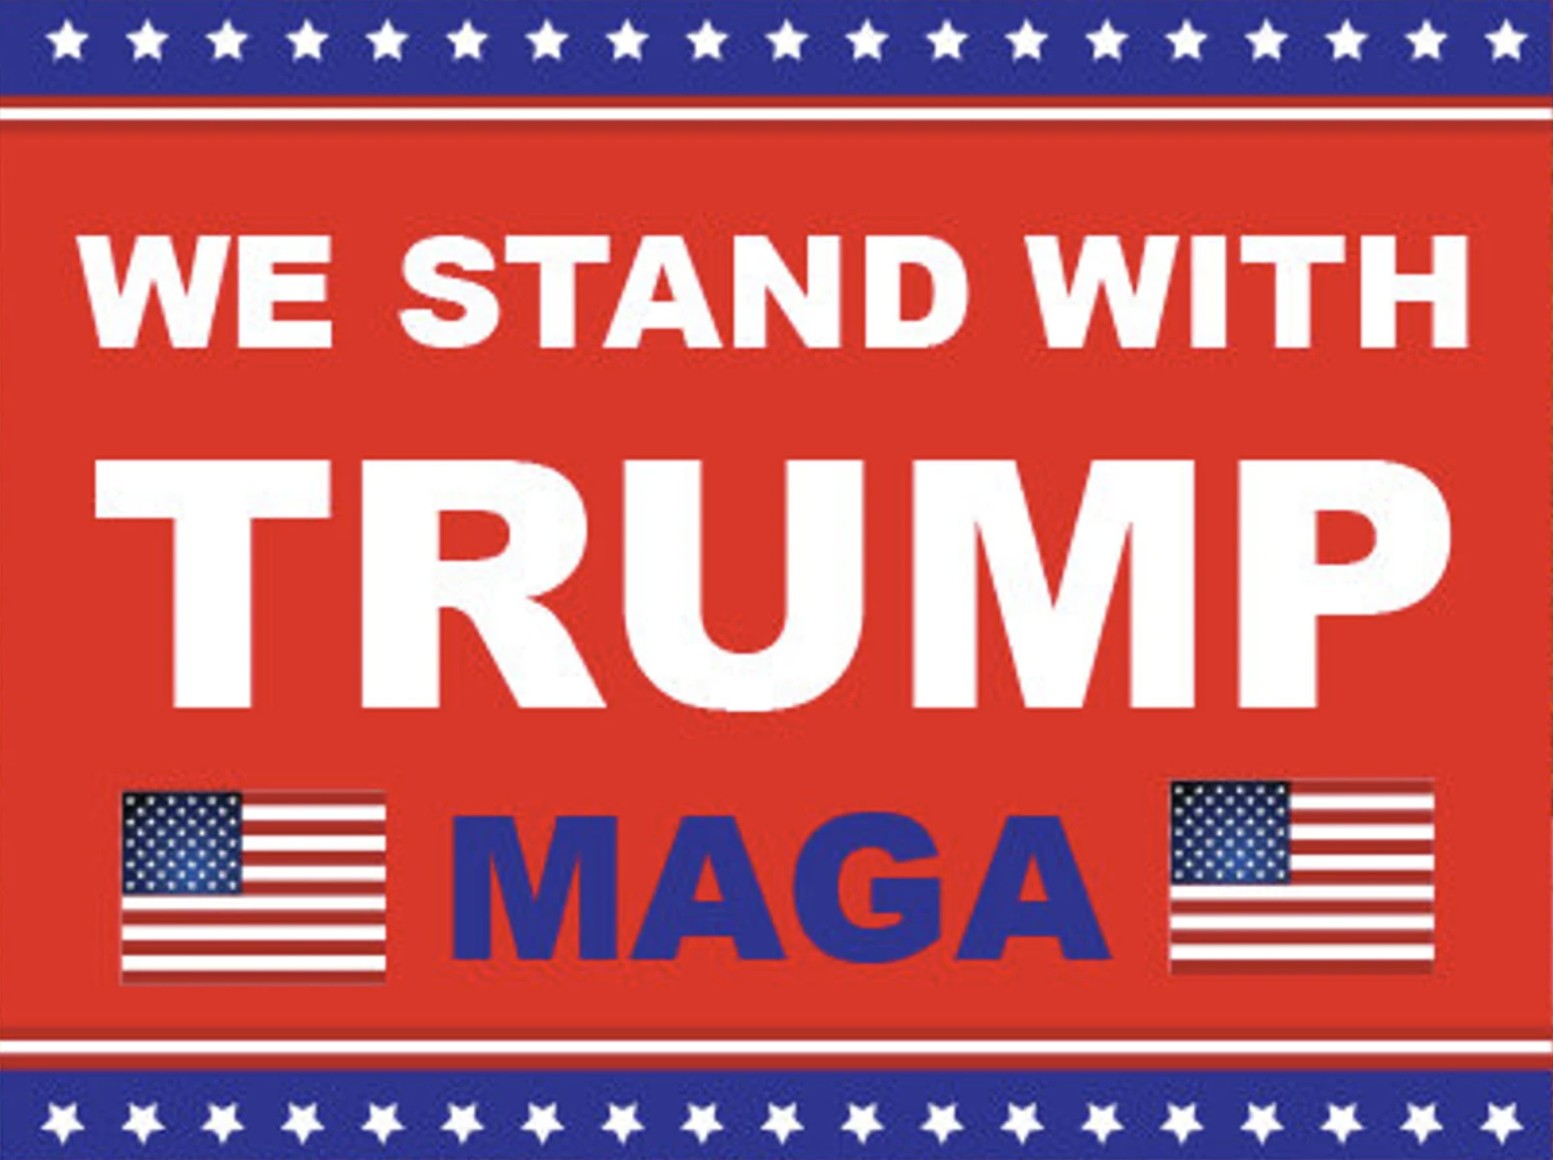 I stand with Trump or We stand with Trump Yard signs